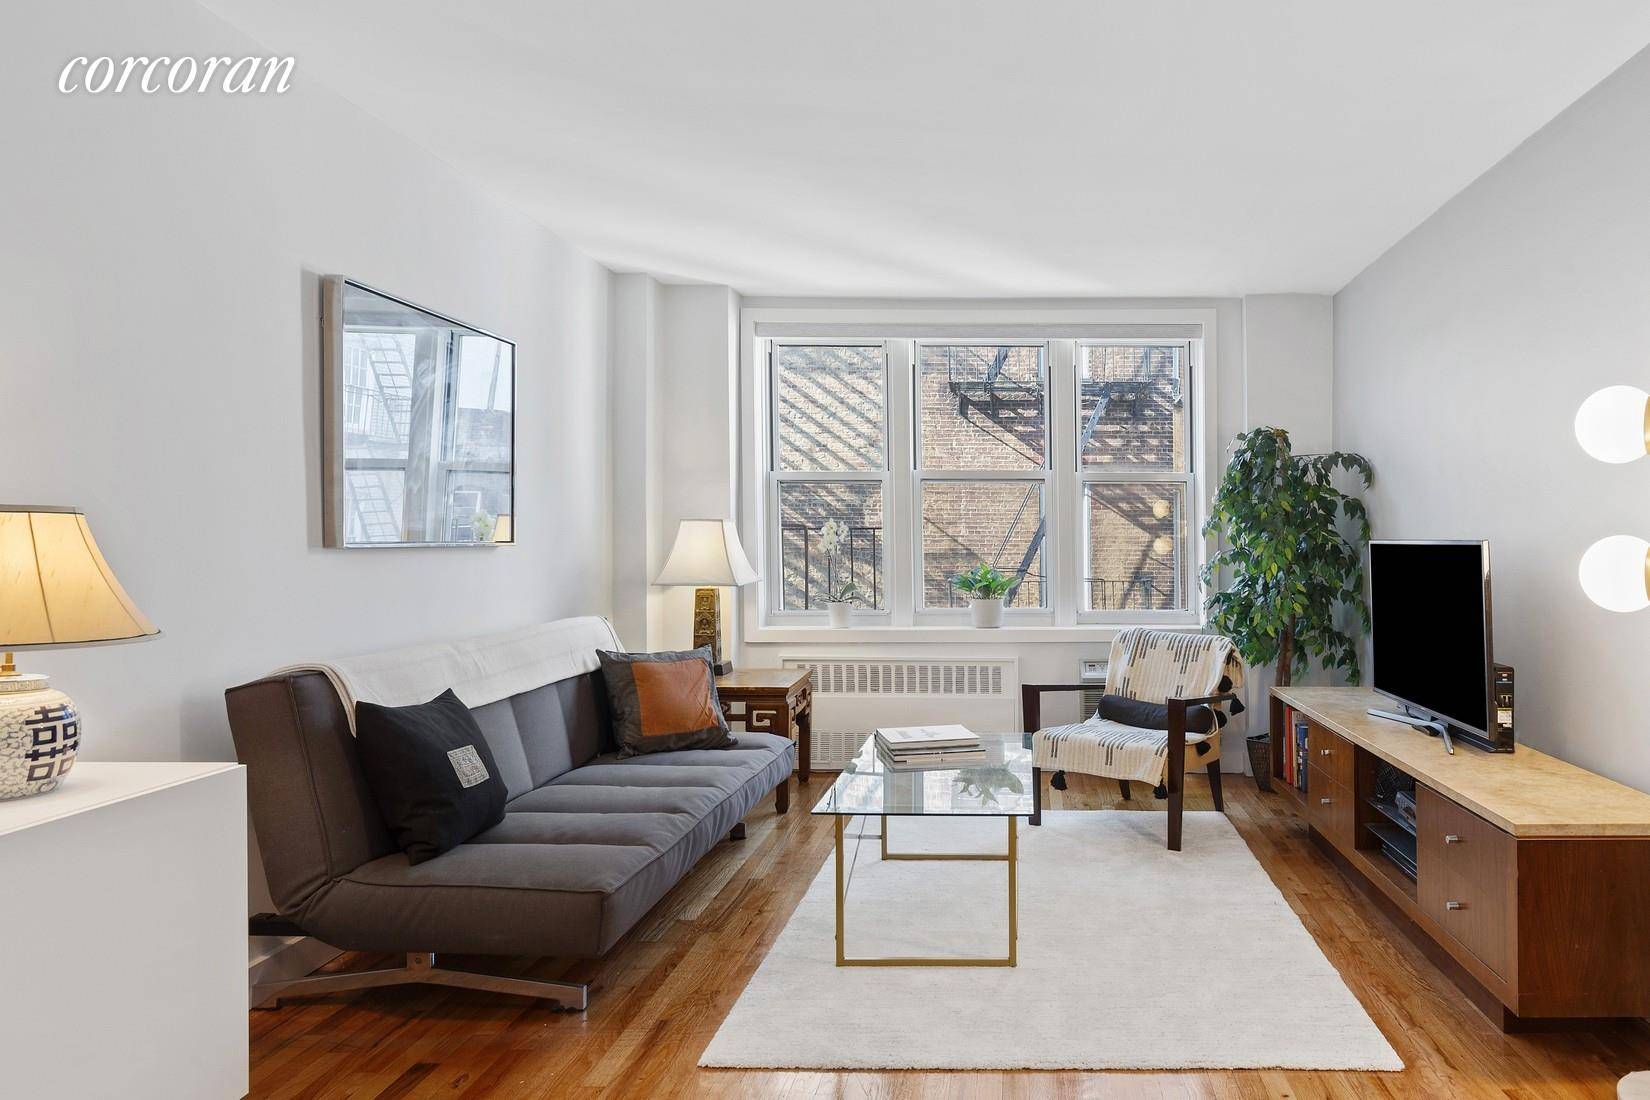 A rarely available combination apartment is available at this classic mid century co op in the coveted Fruit Streets area of Brooklyn Heights.